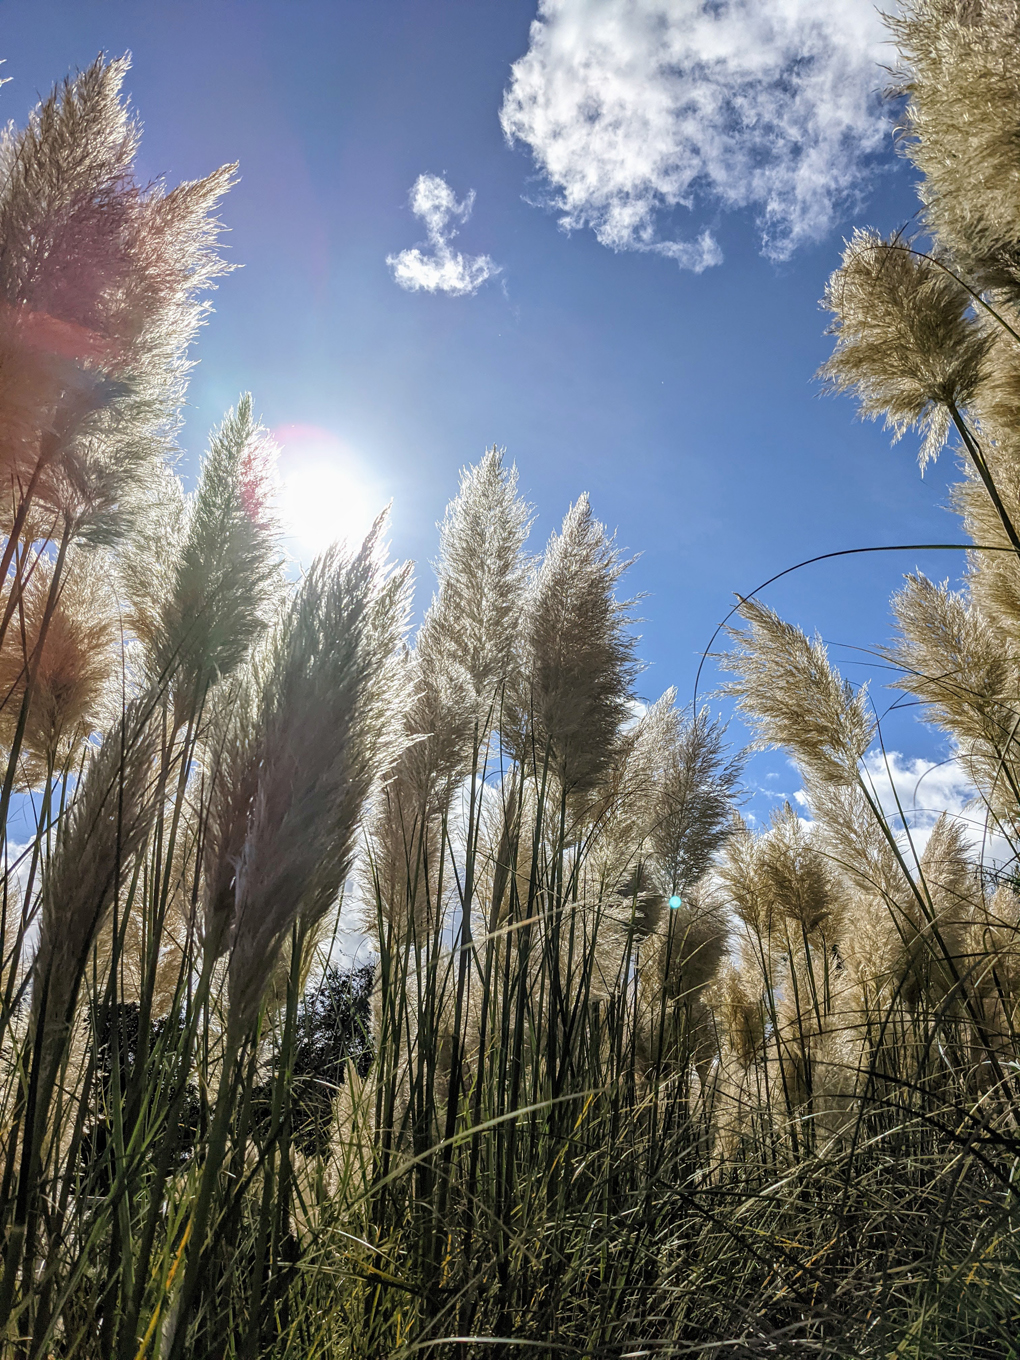 Photo of ornamental grass backlit by the sun and sky.